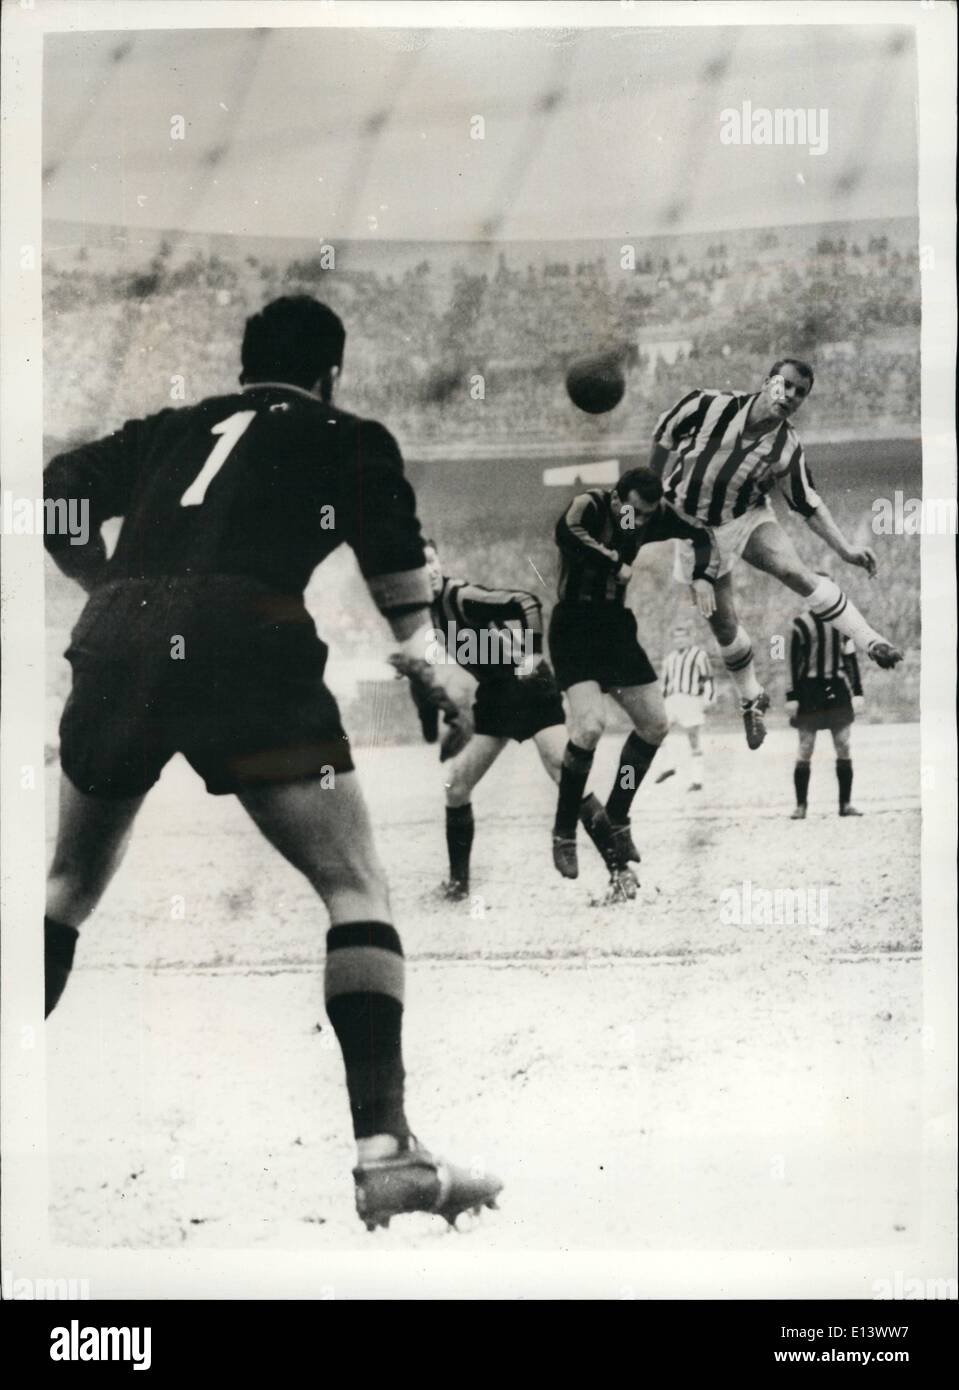 Mar. 27, 2012 - John Charles Scores Vital Goal - ''Juventus'' Beats International Milan. A huge crowd attended the log awaited match between 'Juventus' Turin and ''Internationale'' Milan - in Milan. The match ended in a win for ''Juventus' - the first goal of the match being scored by John Charles. Photo shows: The incident as Cardarelli and Fongaro of the ''Inter'' team tackle John Charles - but cannot stop him from scoring the first goal. A split second later the ball entered the net Stock Photo